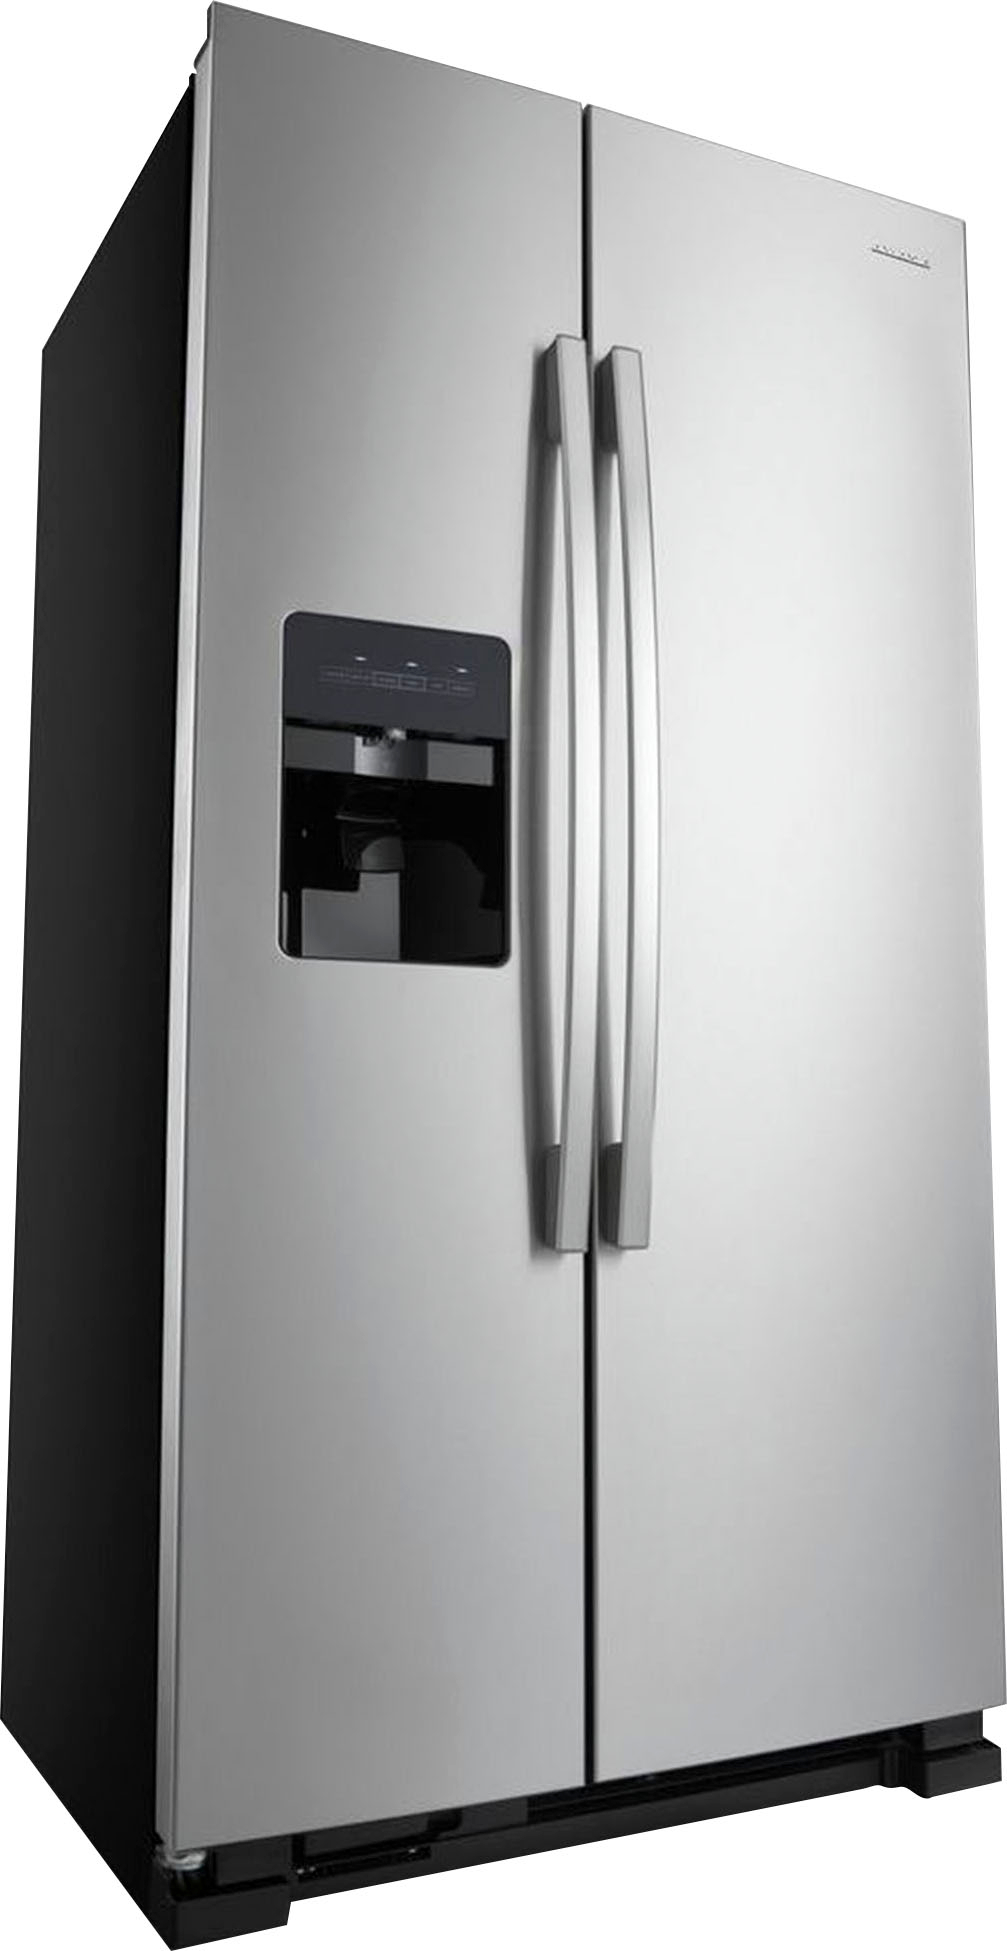 Questions and Answers: Amana 21.4 Cu. Ft. Side-by-Side Refrigerator ...